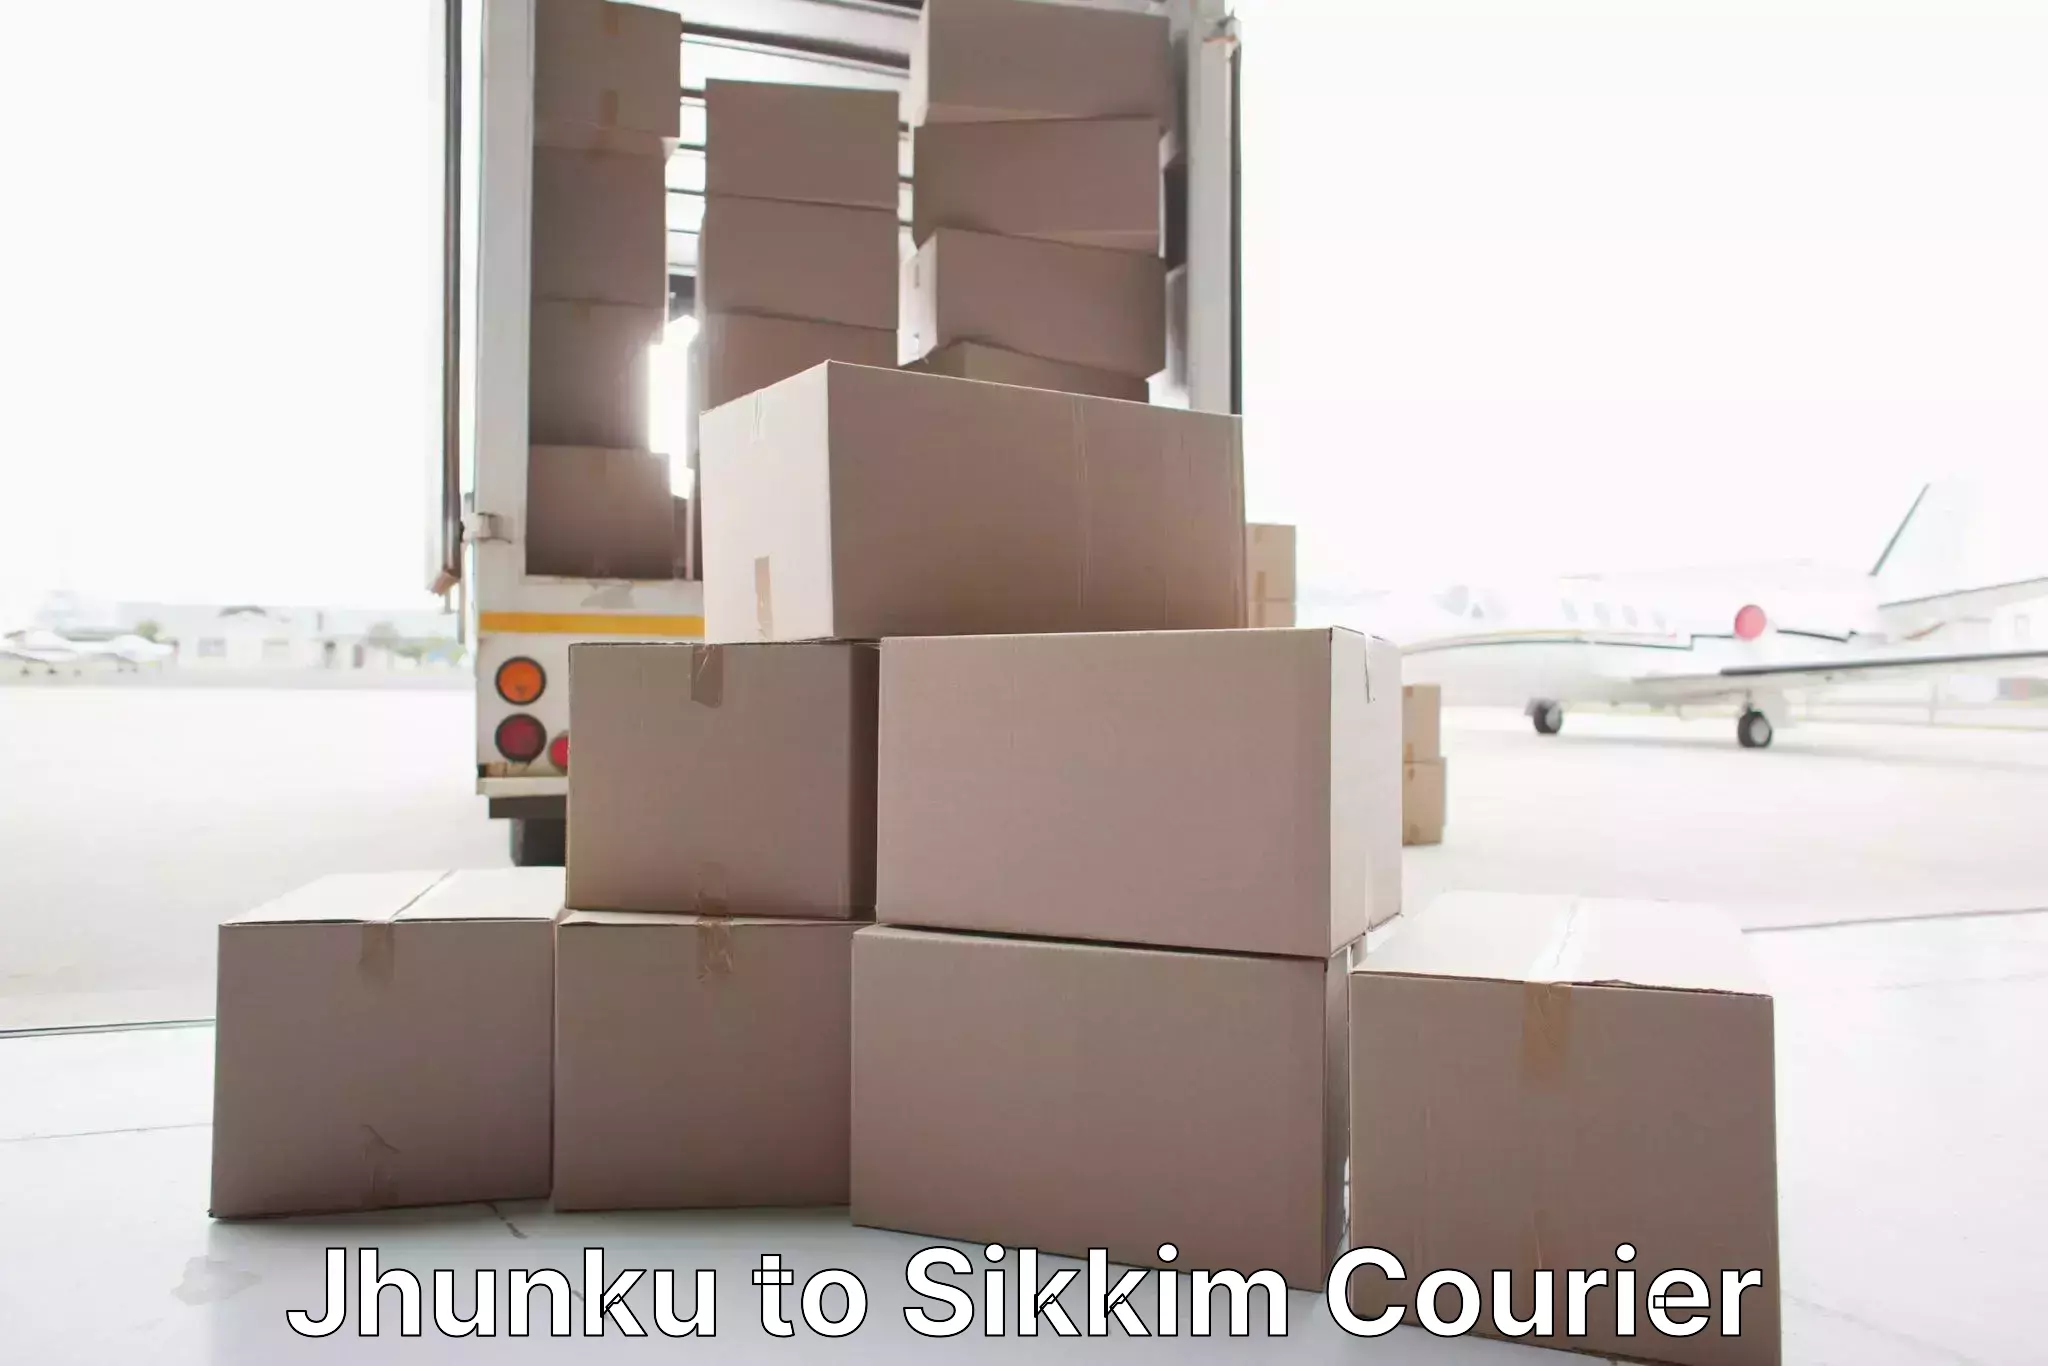 Quality moving services Jhunku to Sikkim